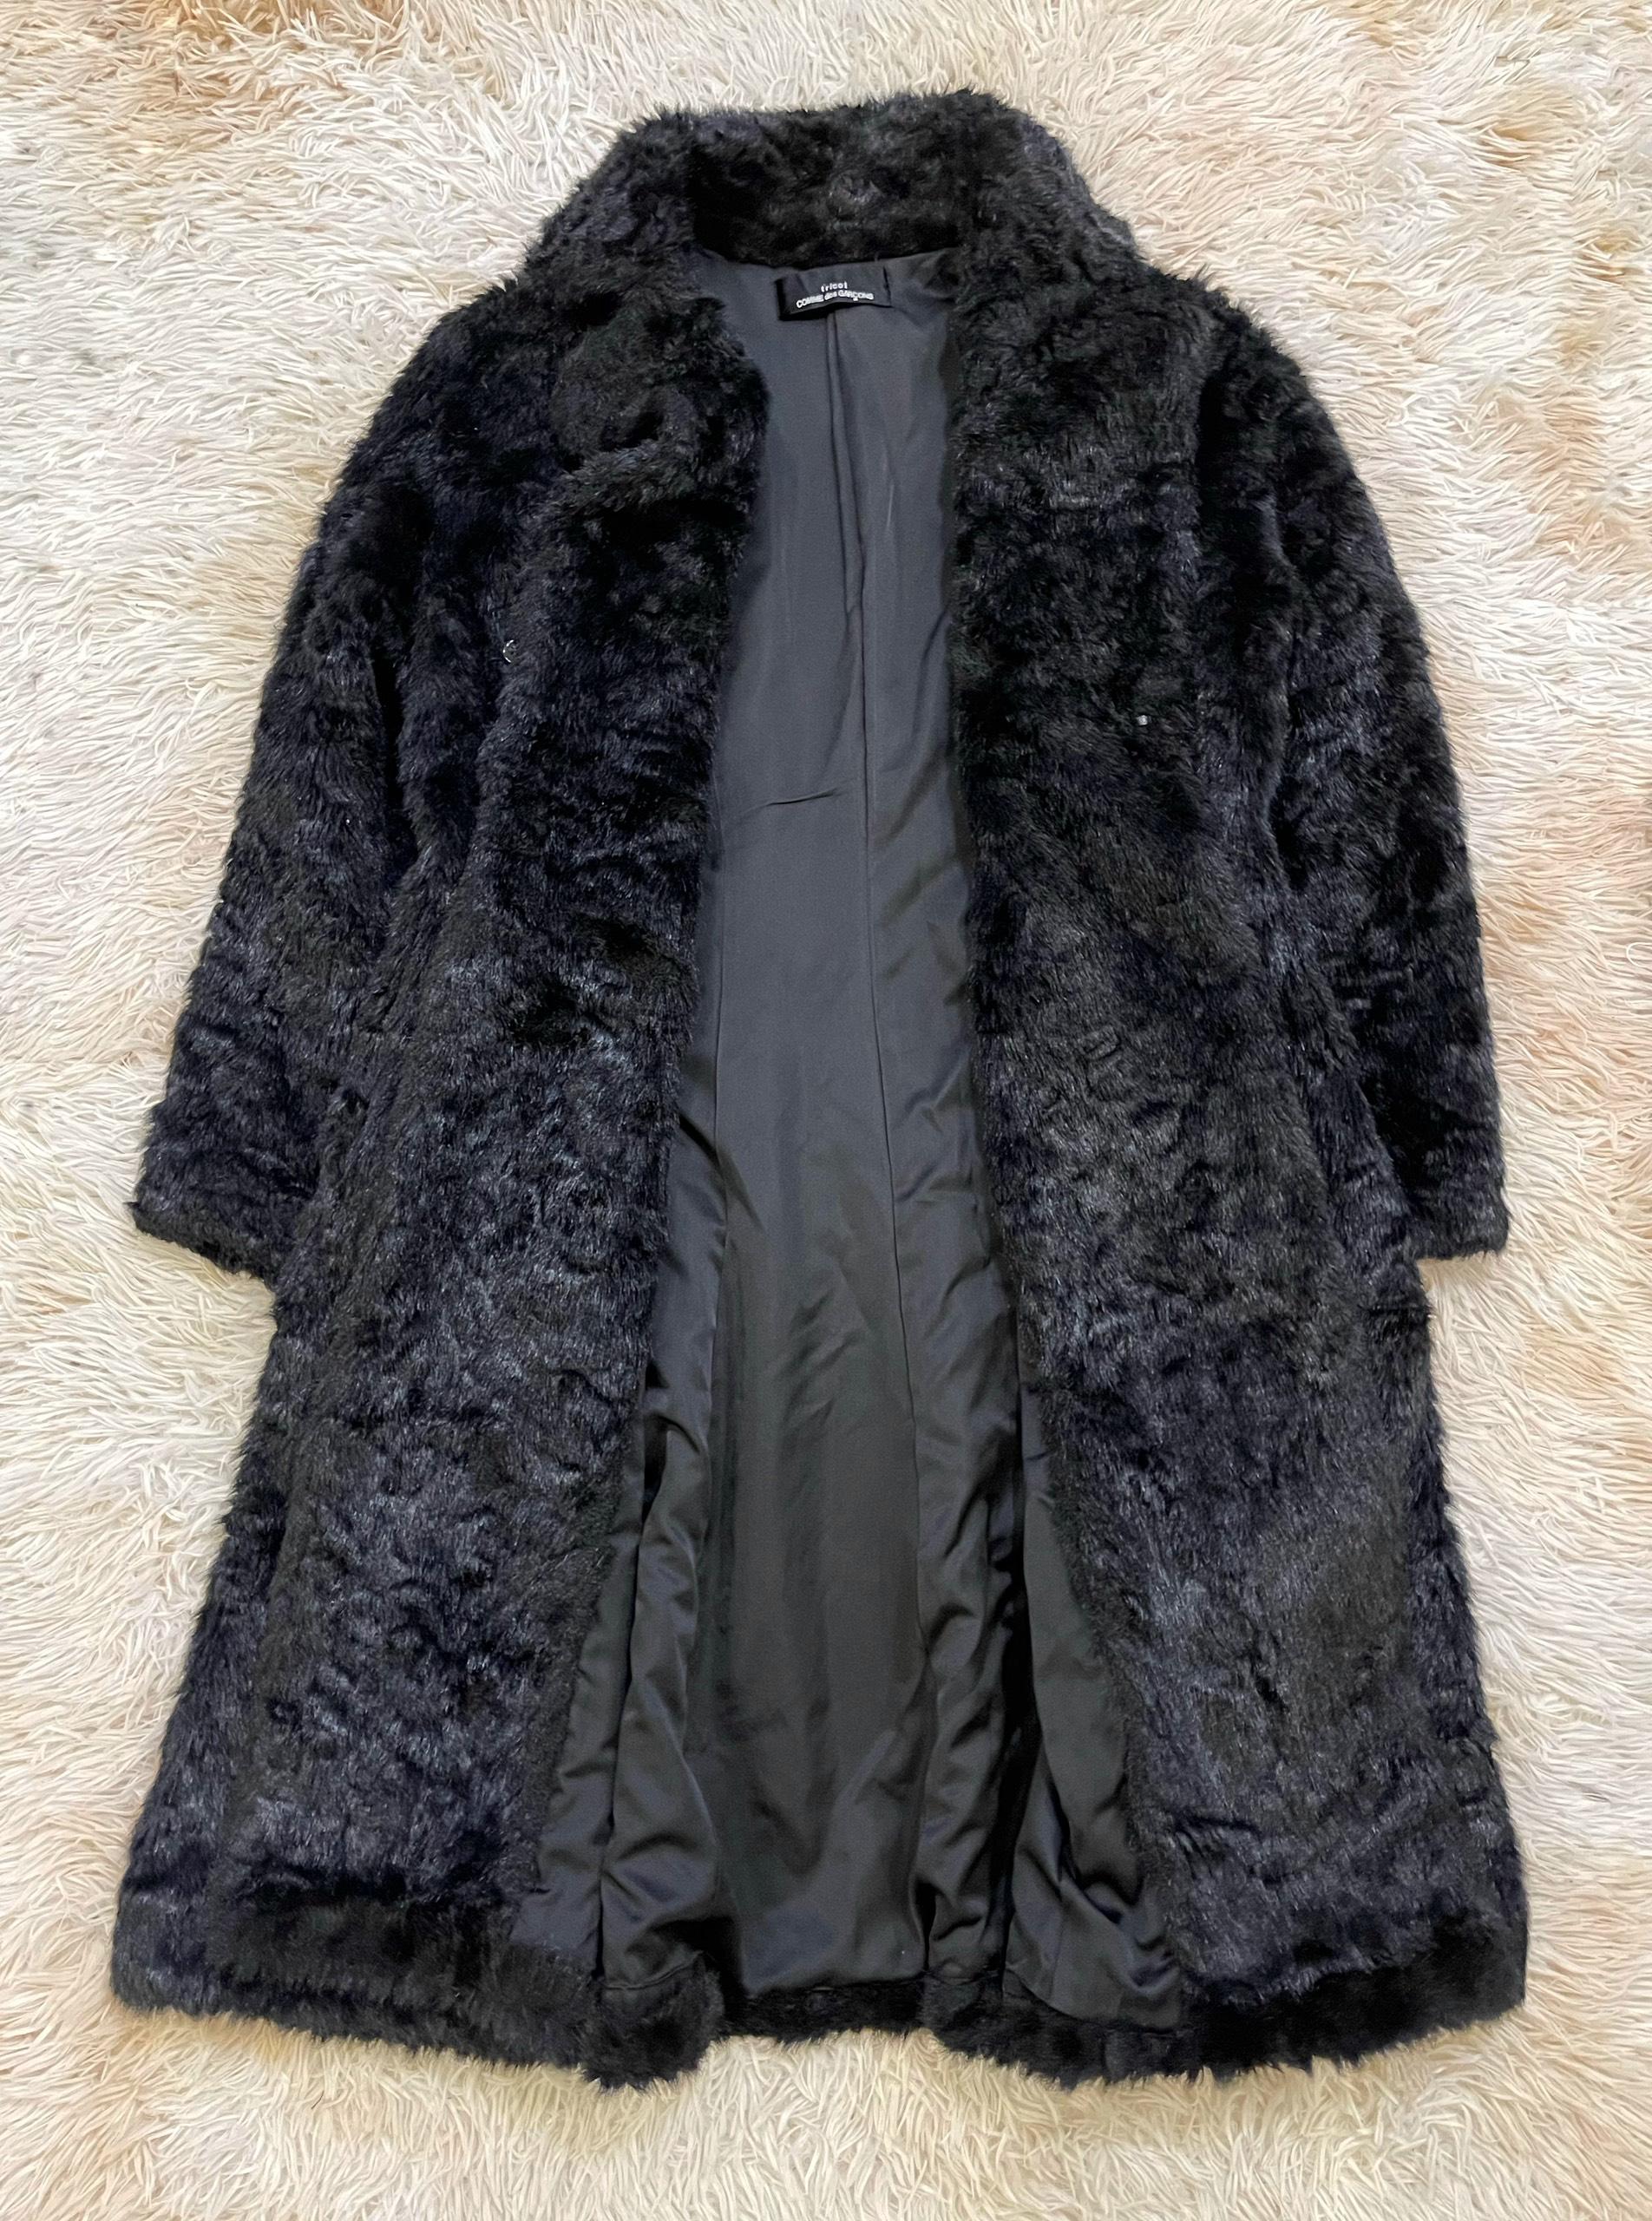 The item was designed by Tao Kurihara for tricot line, Comme Des Garcons.

Size: OS, fits oversized up to a Large

Condition: 8/10. Minor feels of usage overall, light distressed on washtag

Feels free to message me with any questions regarding